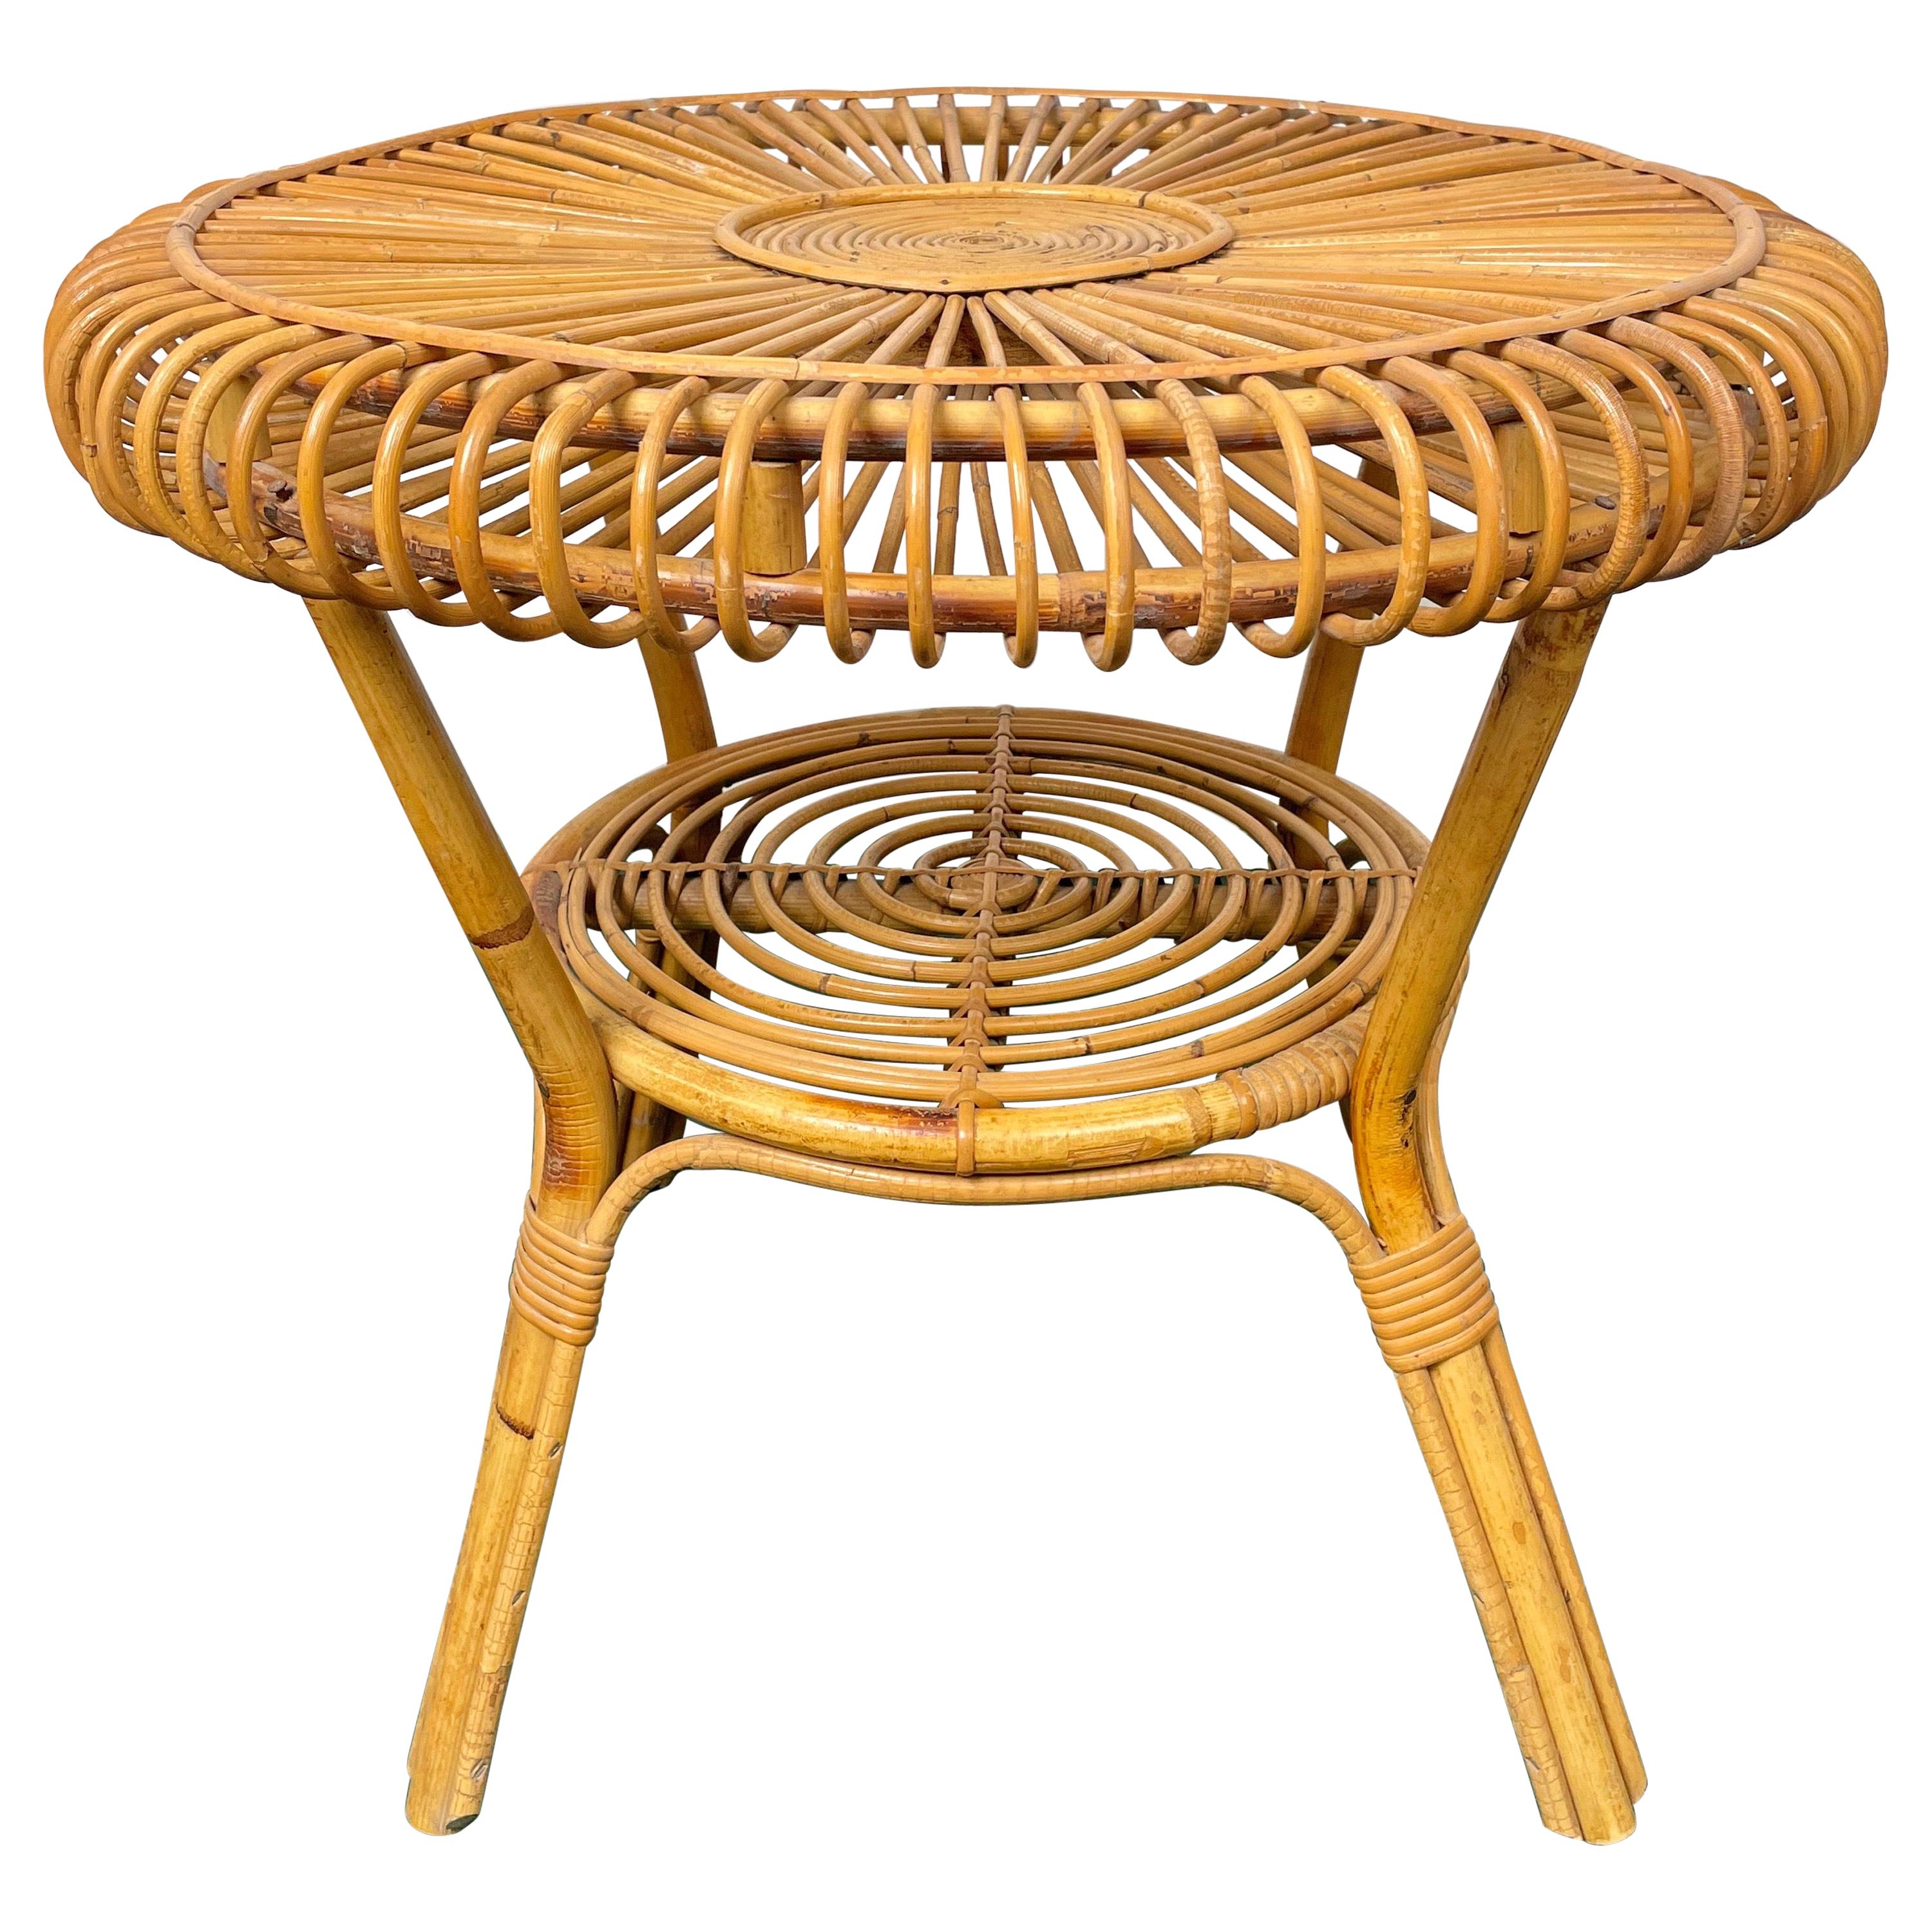 Rattan Round Tables - For Sale on 1stDibs | rattan center table 